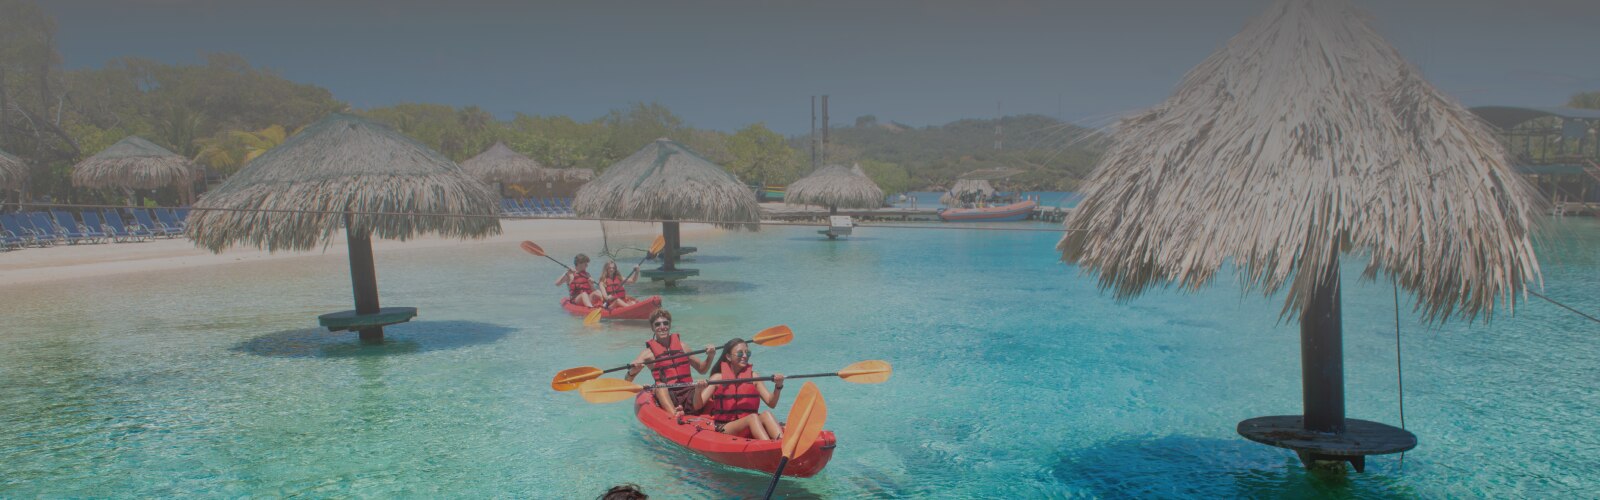 Select World of Hyatt Inclusive Collection Resorts 